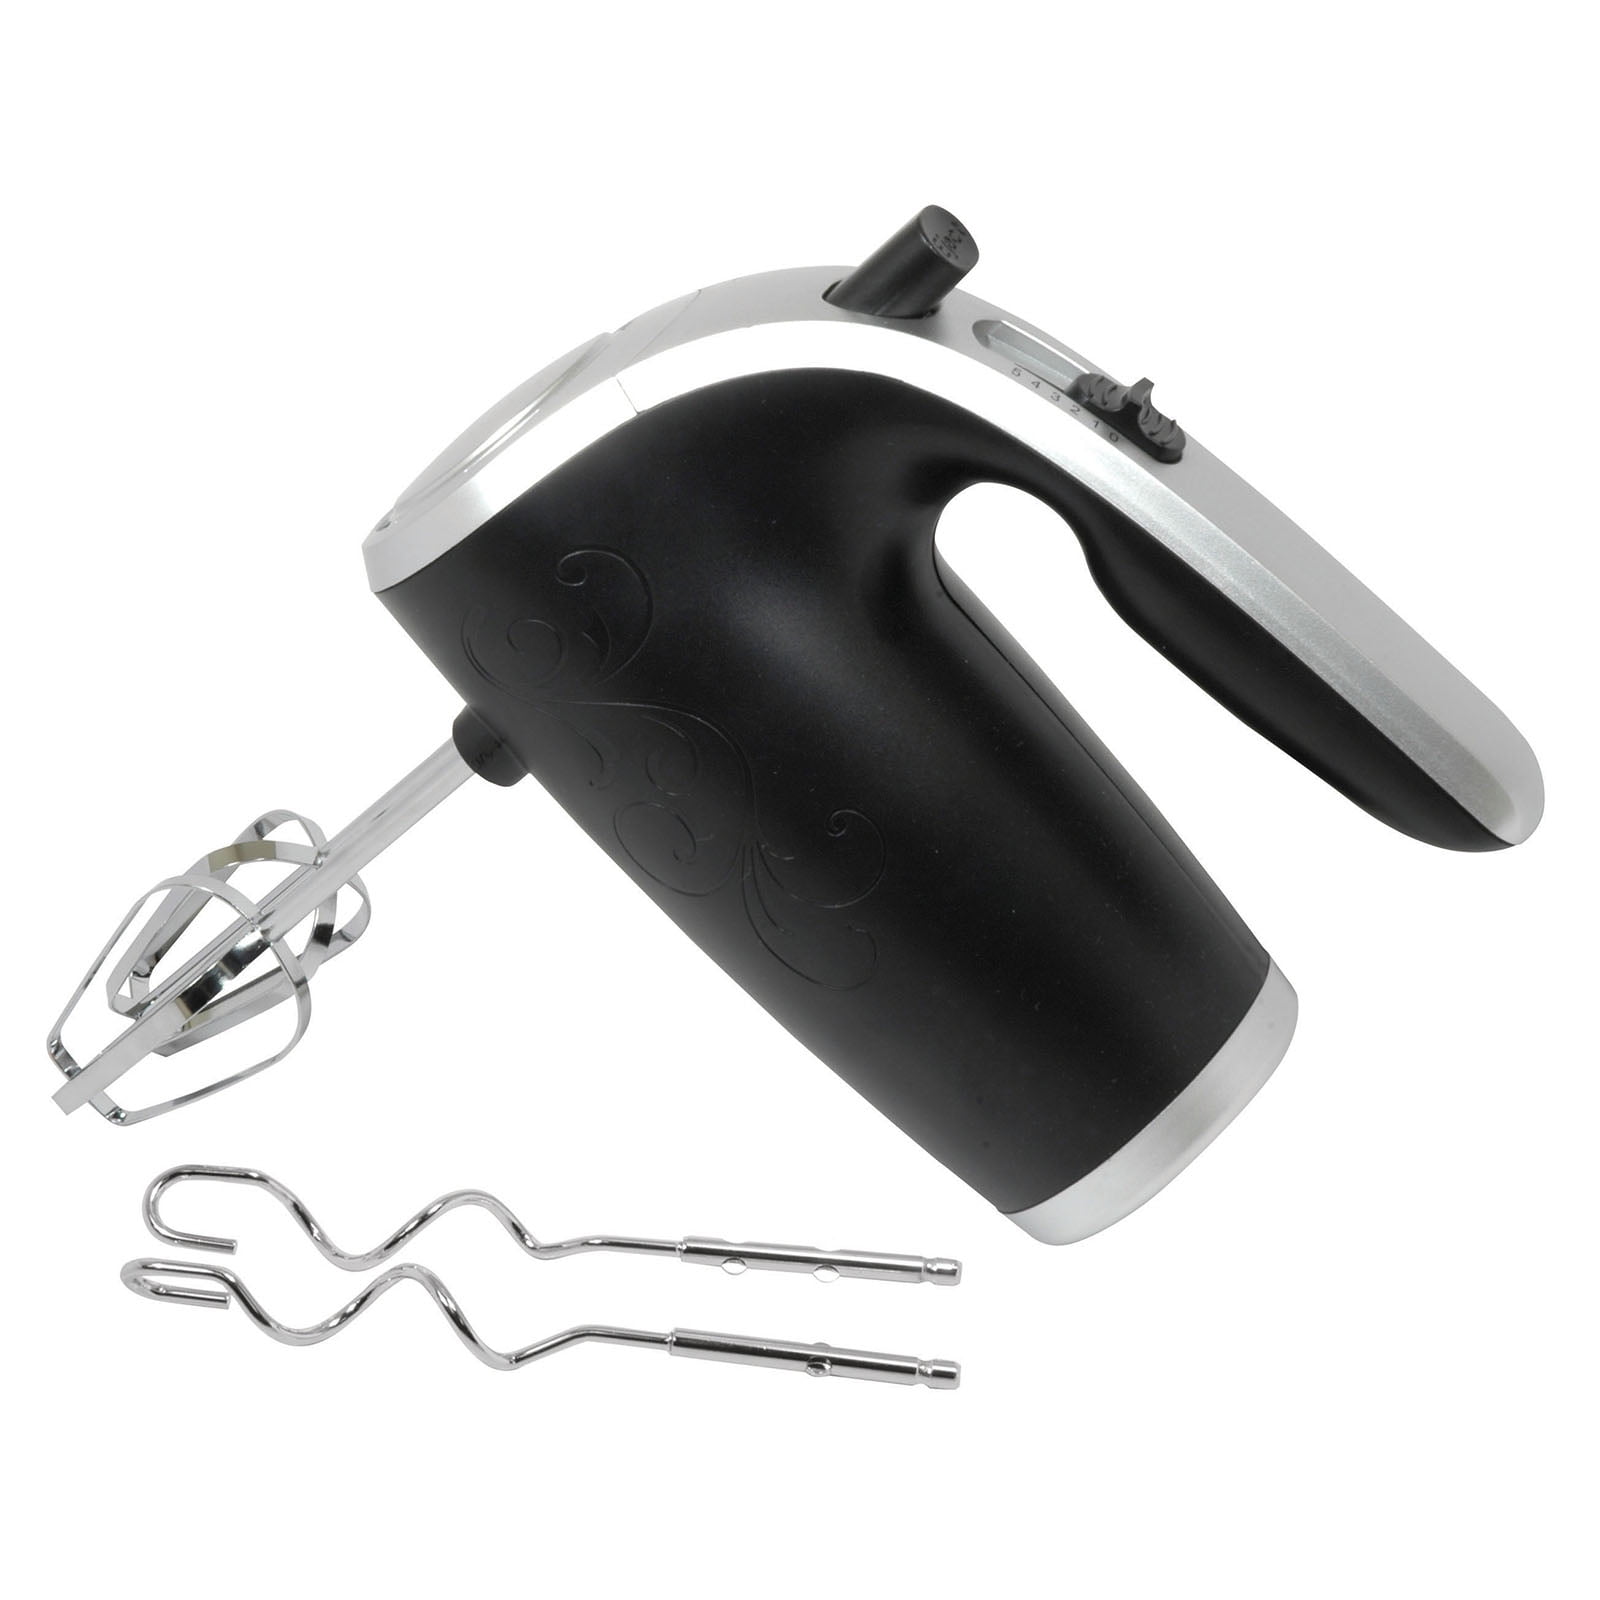 Problemer Flyve drage Forbyde Better Chef 5-Speed 150-Watt Hand Mixer, Black with Silver Accents -  Walmart.com